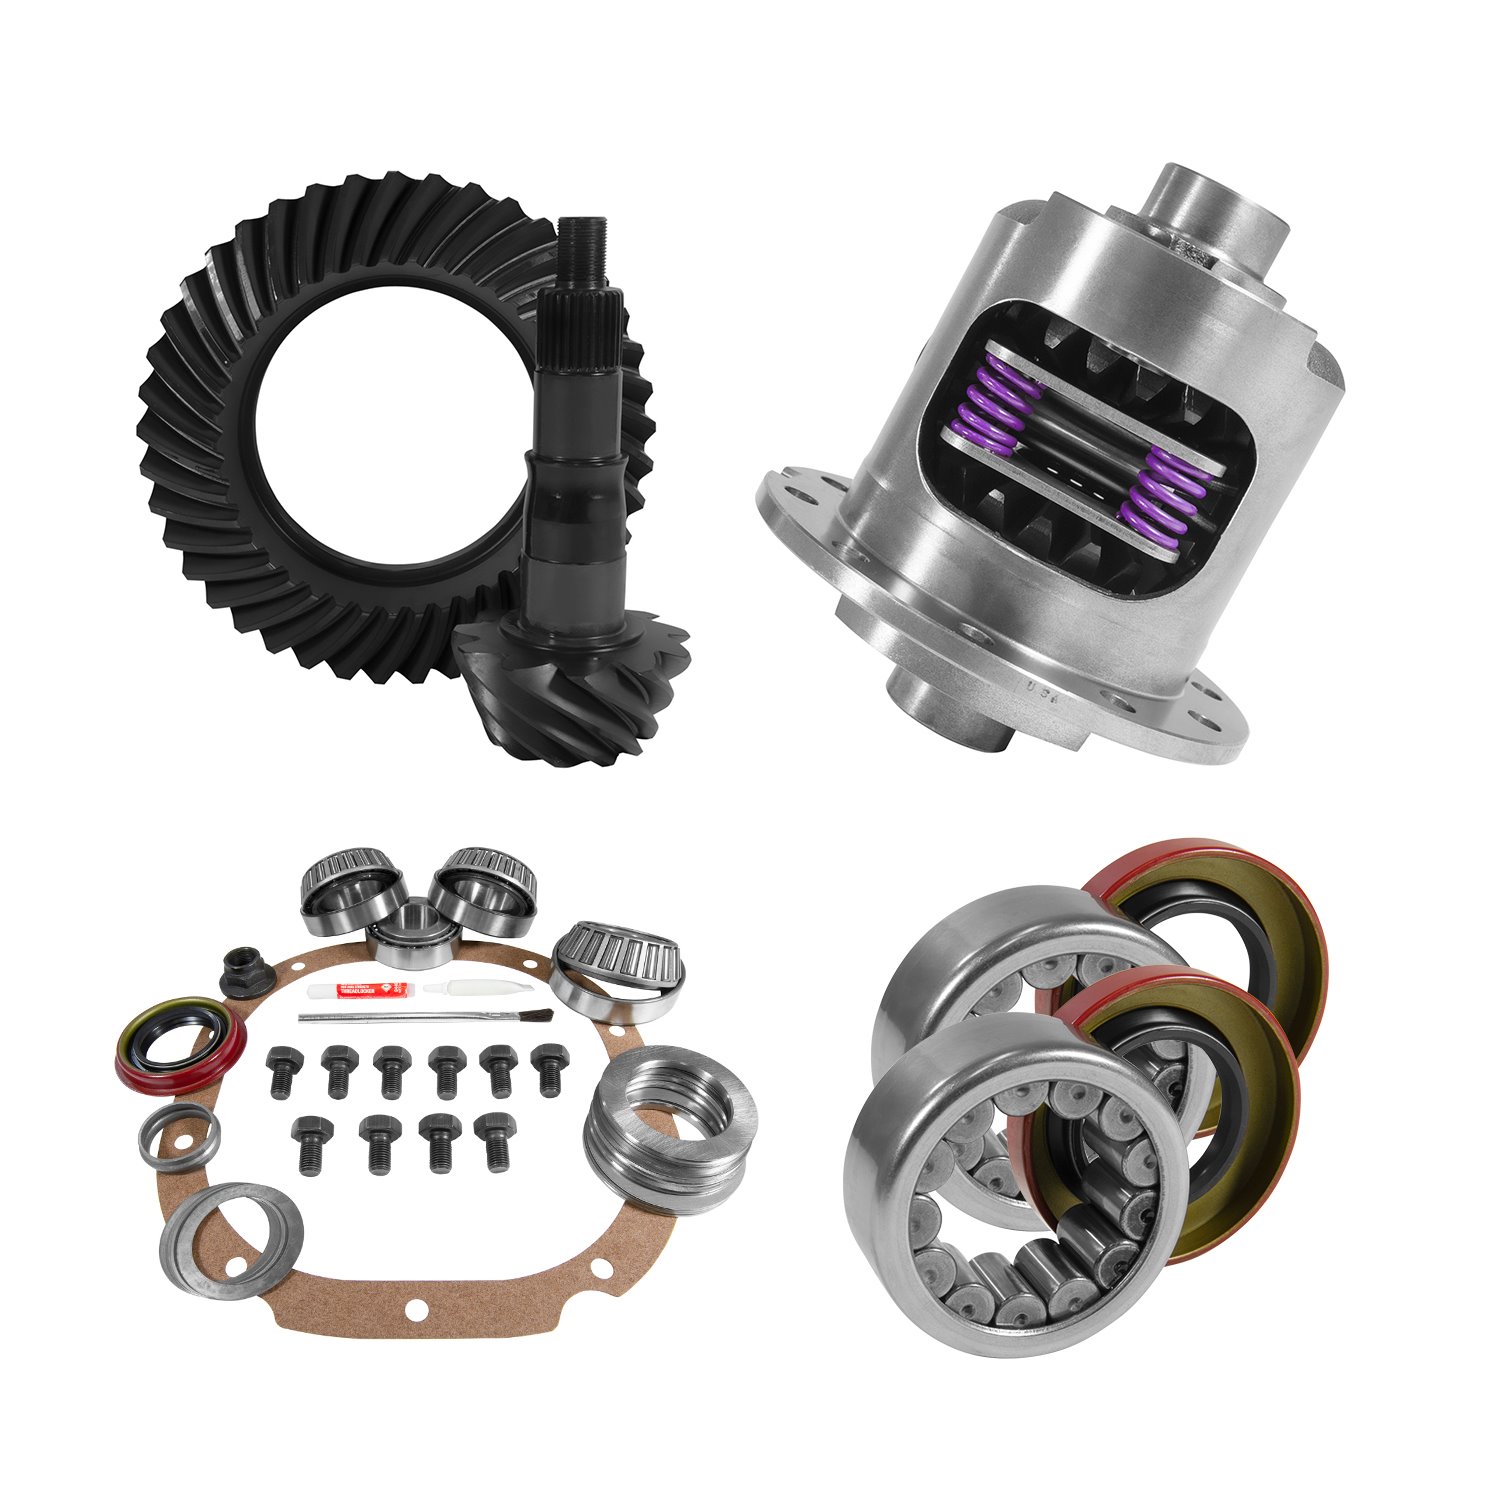 USA Standard 10772 8.8 in. Ford 3.73 Rear Ring & Pinion Install Kit, 31Spl Posi, 2.99 in. Axle Bearings